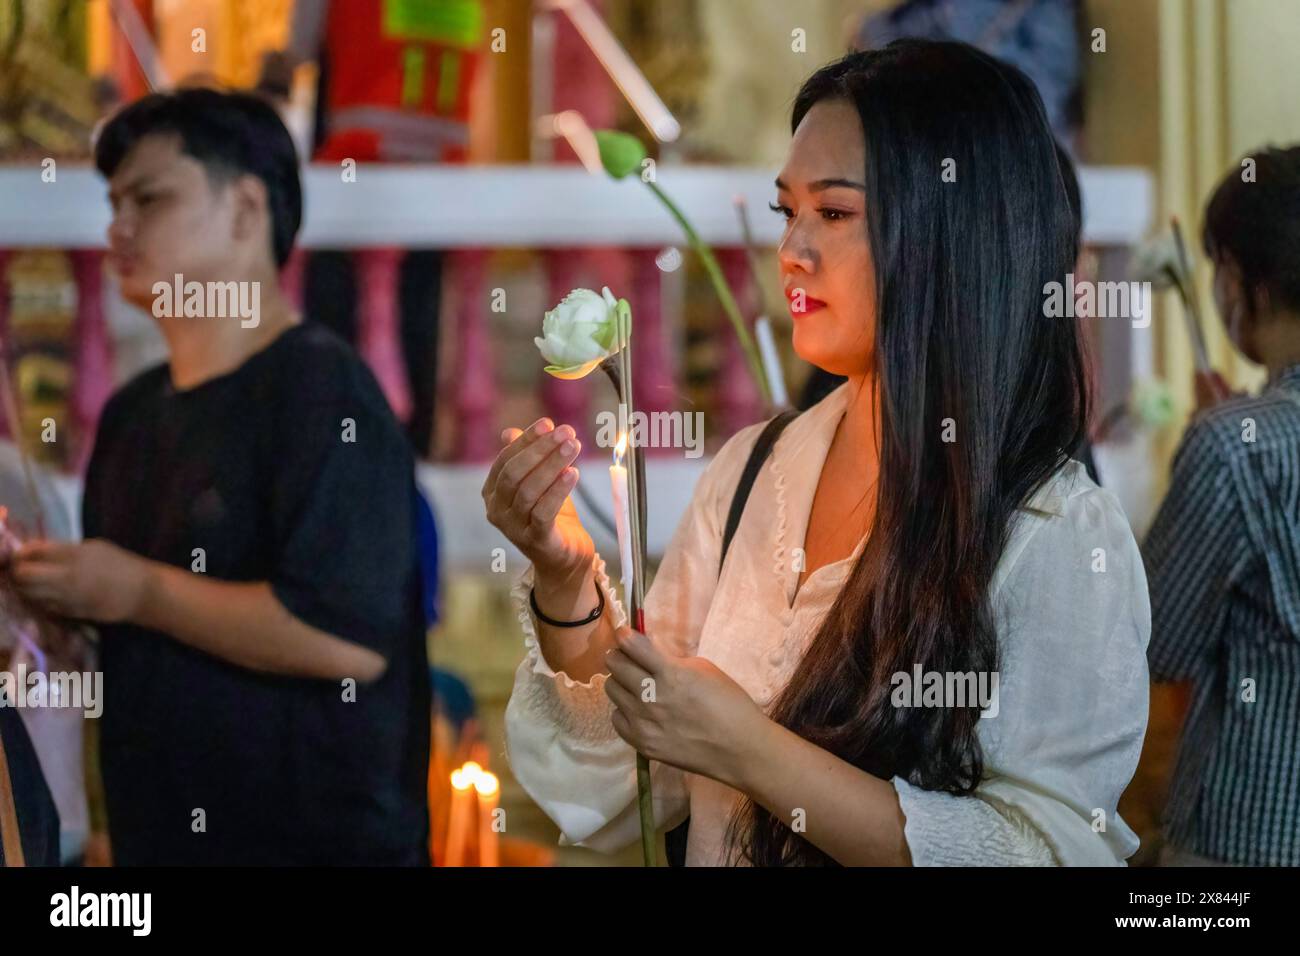 May 22, 2024, Bangkok, Thailand: A Thai woman is seen holding a candle and a lotus flower, on Visakha Bucha day, at Lat Phrao Temple, situated in a low-income community, in Bangkok, Thailand. Visakha Bucha, one of Thailand's most important Buddhist holidays, commemorates the birth, enlightenment, and passing of Gautama Buddha, all on the same date. Thai Buddhists typically visit temples to make merit, which involves activities such as giving alms to monks, listening to sermons, and participating in various religious rituals. (Credit Image: © Nathalie Jamois/SOPA Images via ZUMA Press Wire) EDI Stock Photo